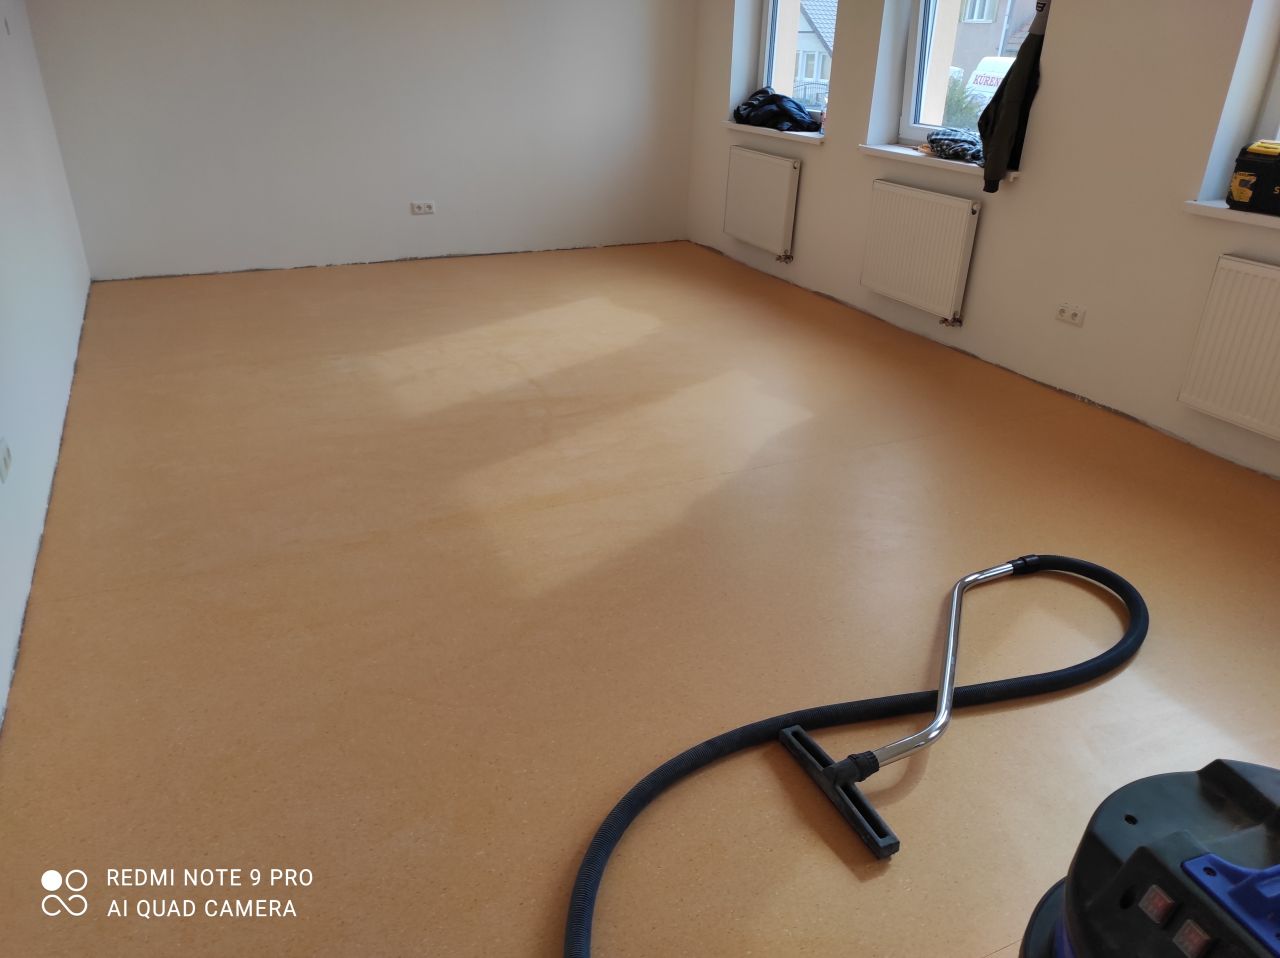 TO - Gerflor Mipolam 04